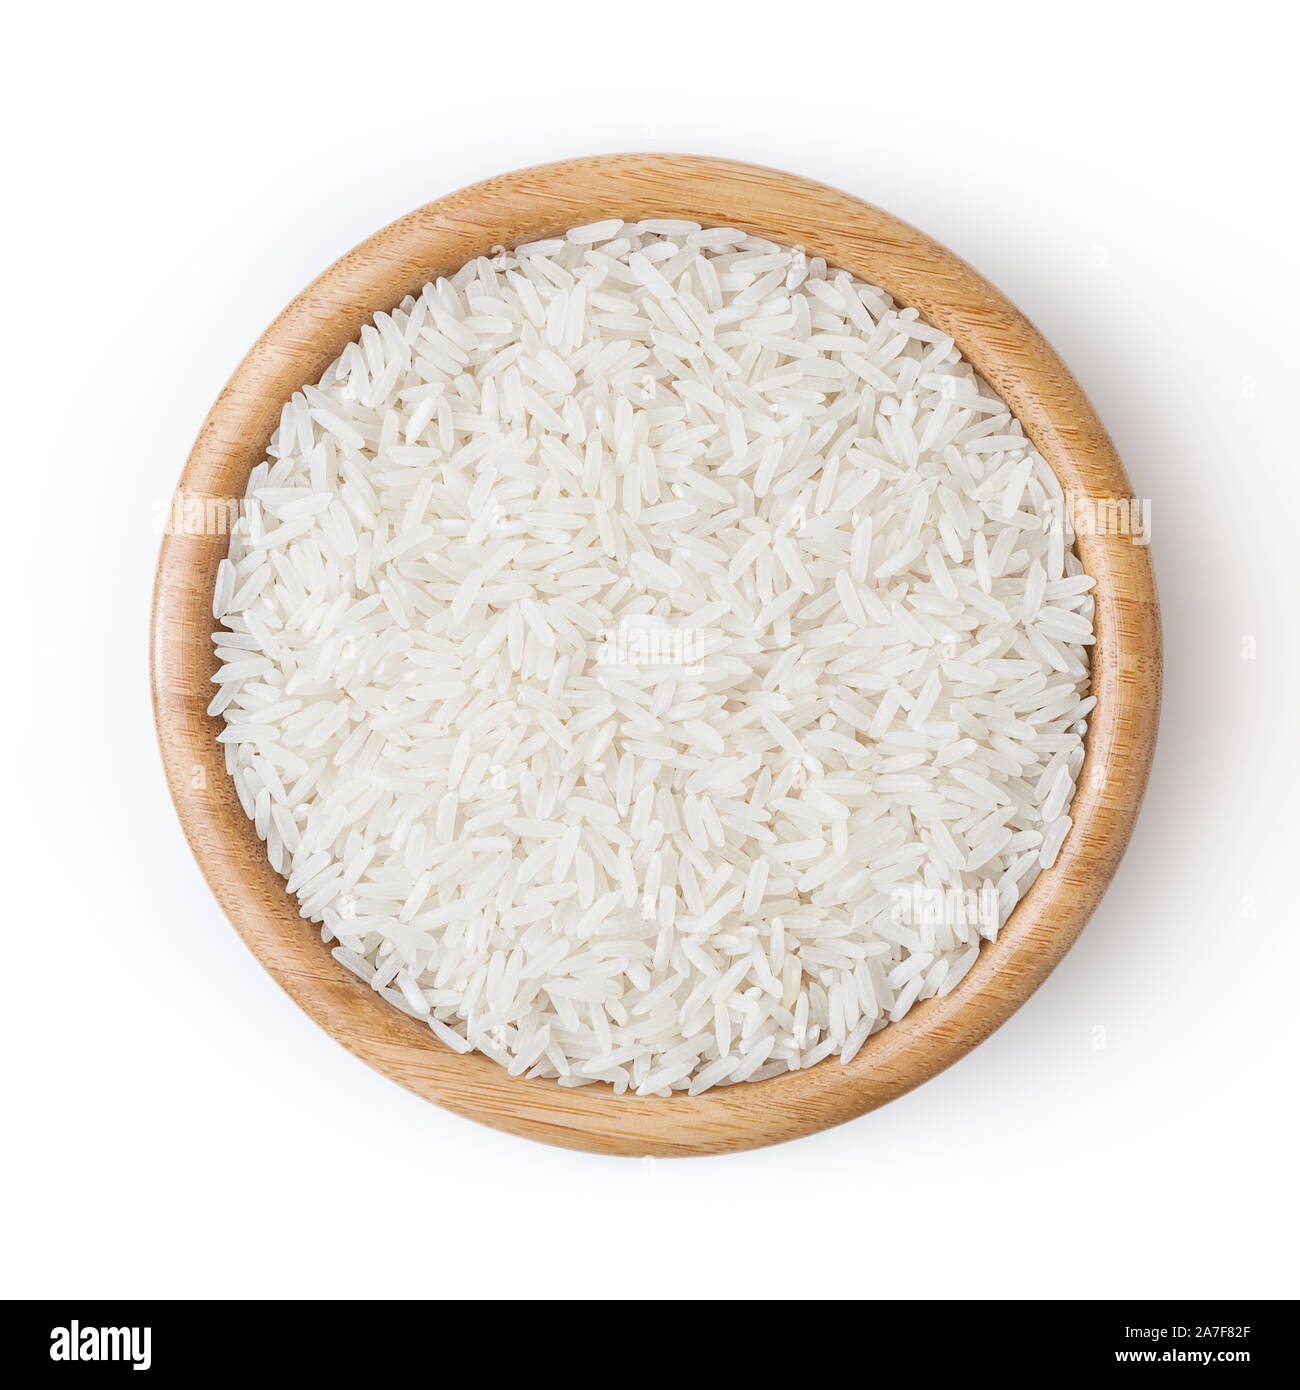 White rice in wooden bowl isolated on white background with clipping path Stock Photo